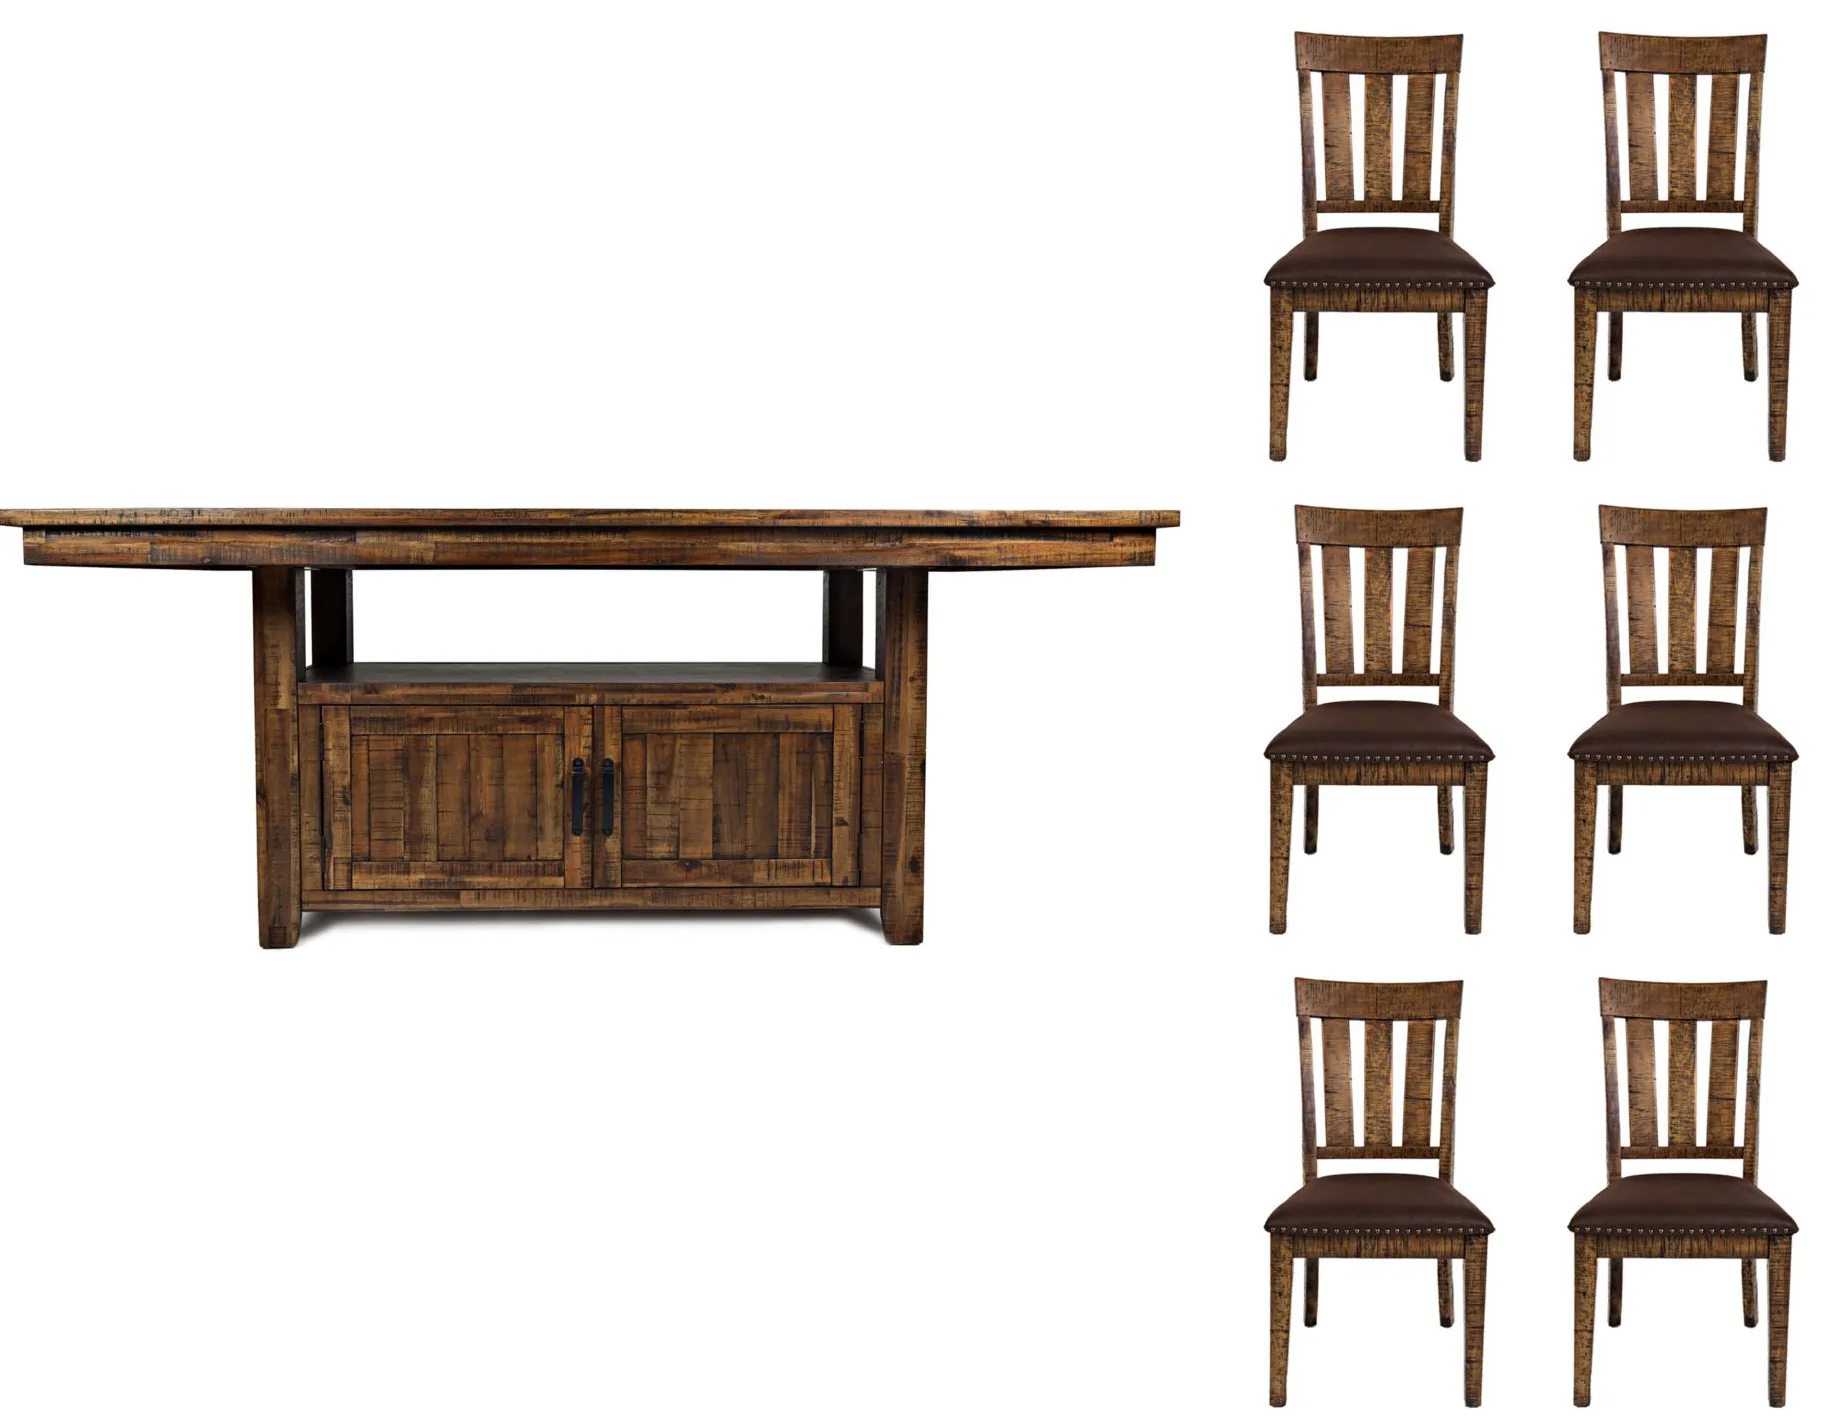 Cannon Valley 7-pc. Dining Set in Brown / Distressed Medium Brown by Jofran